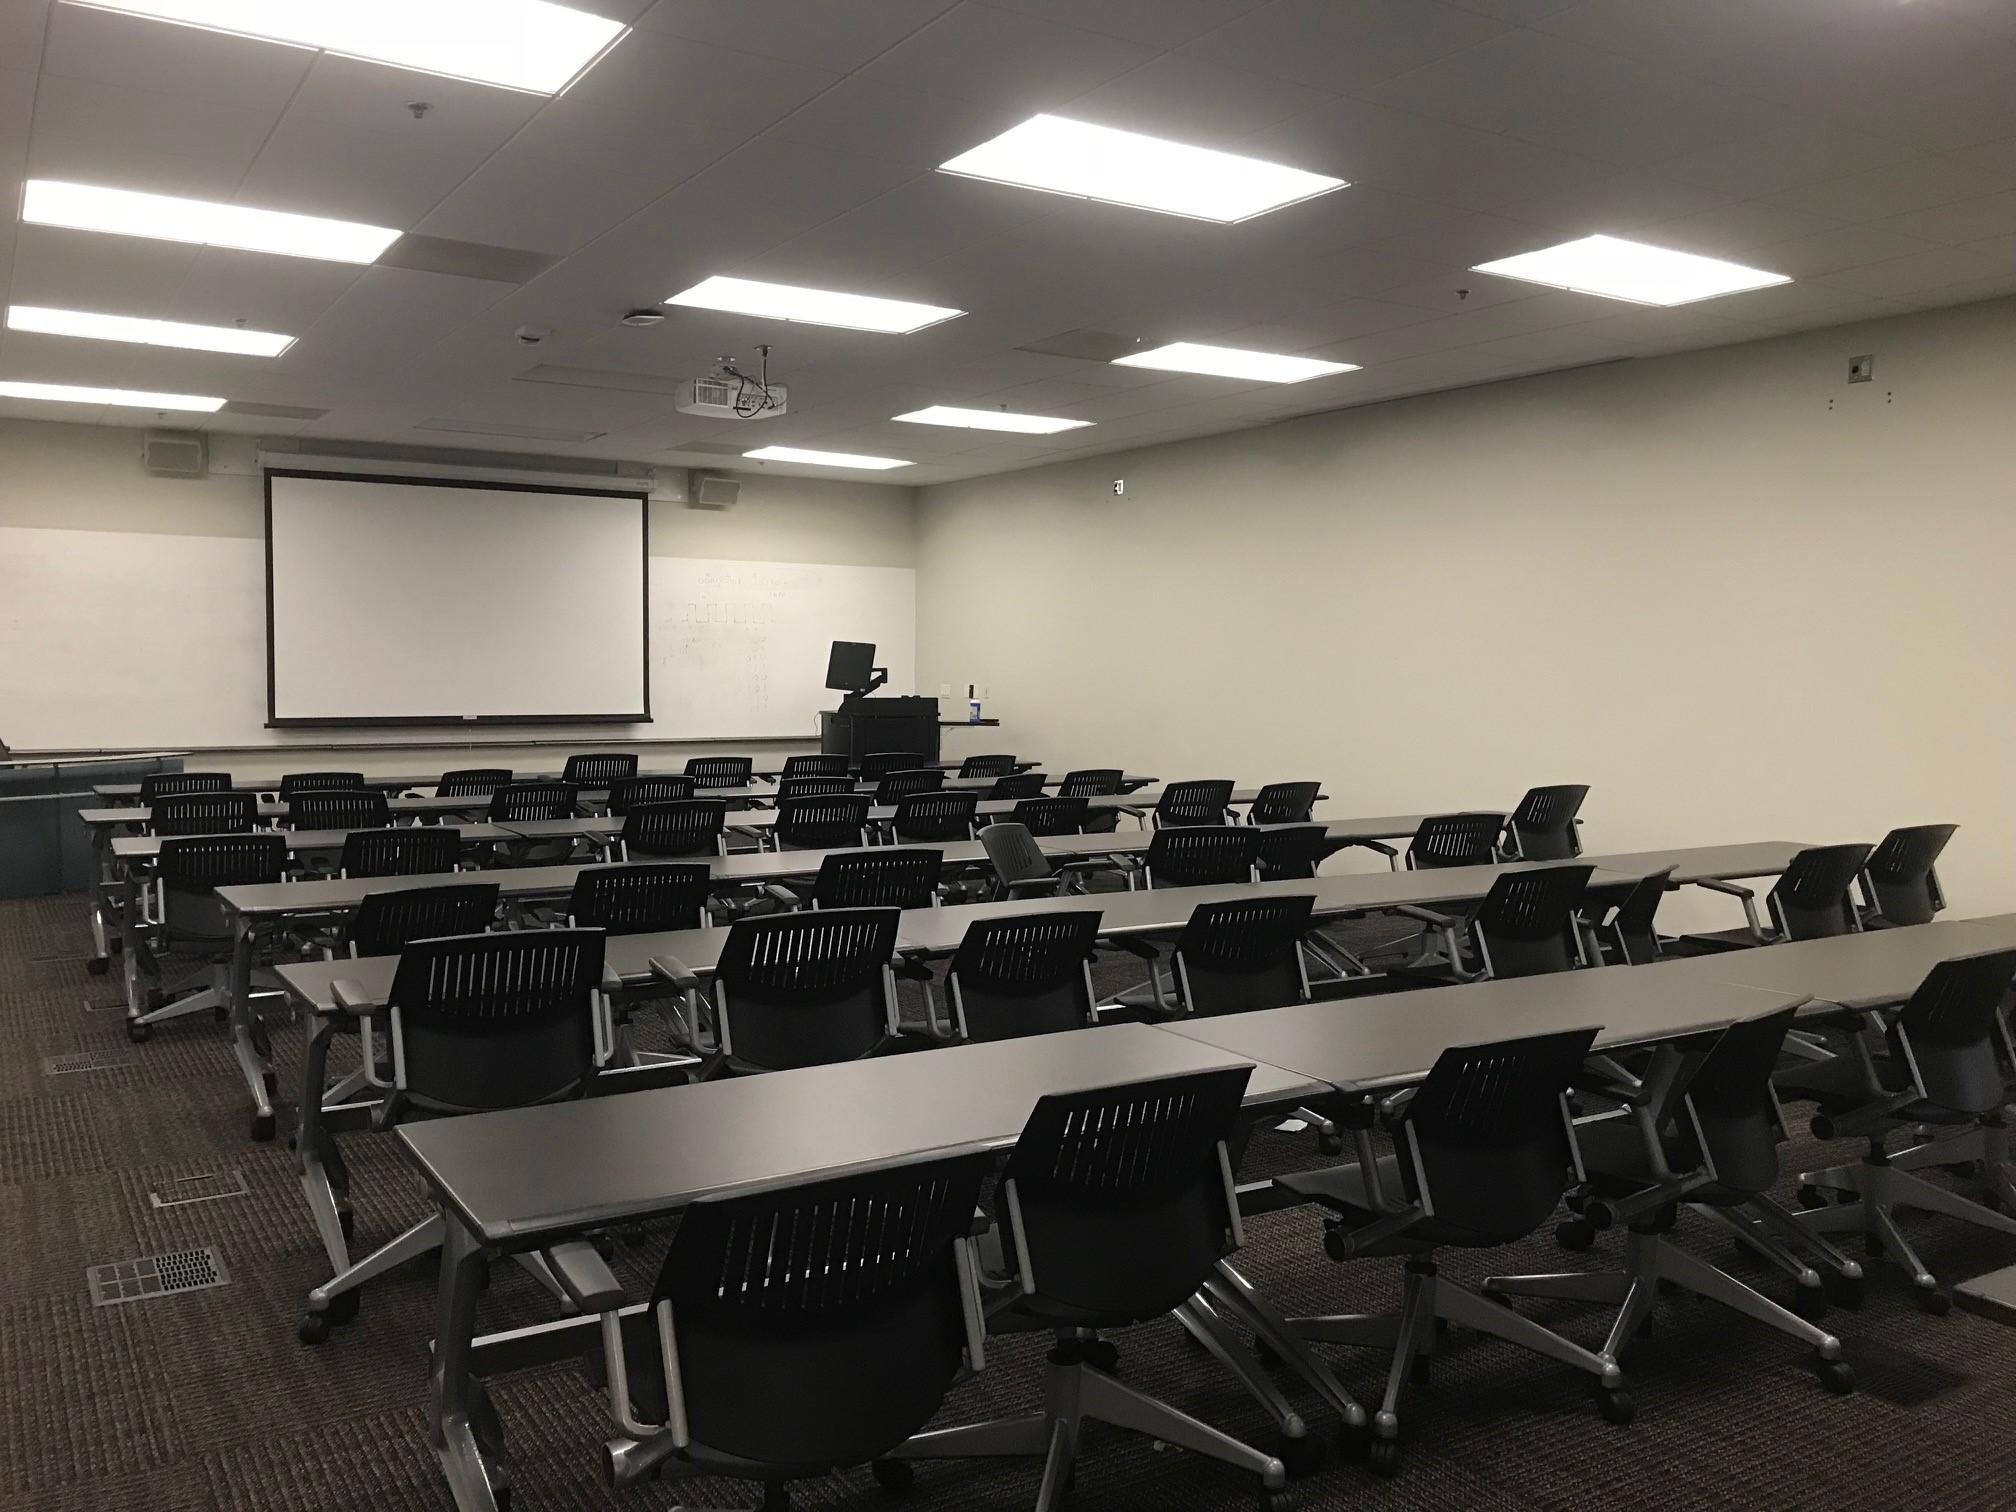 Classrooms - Conference & Event Services - The University ...
